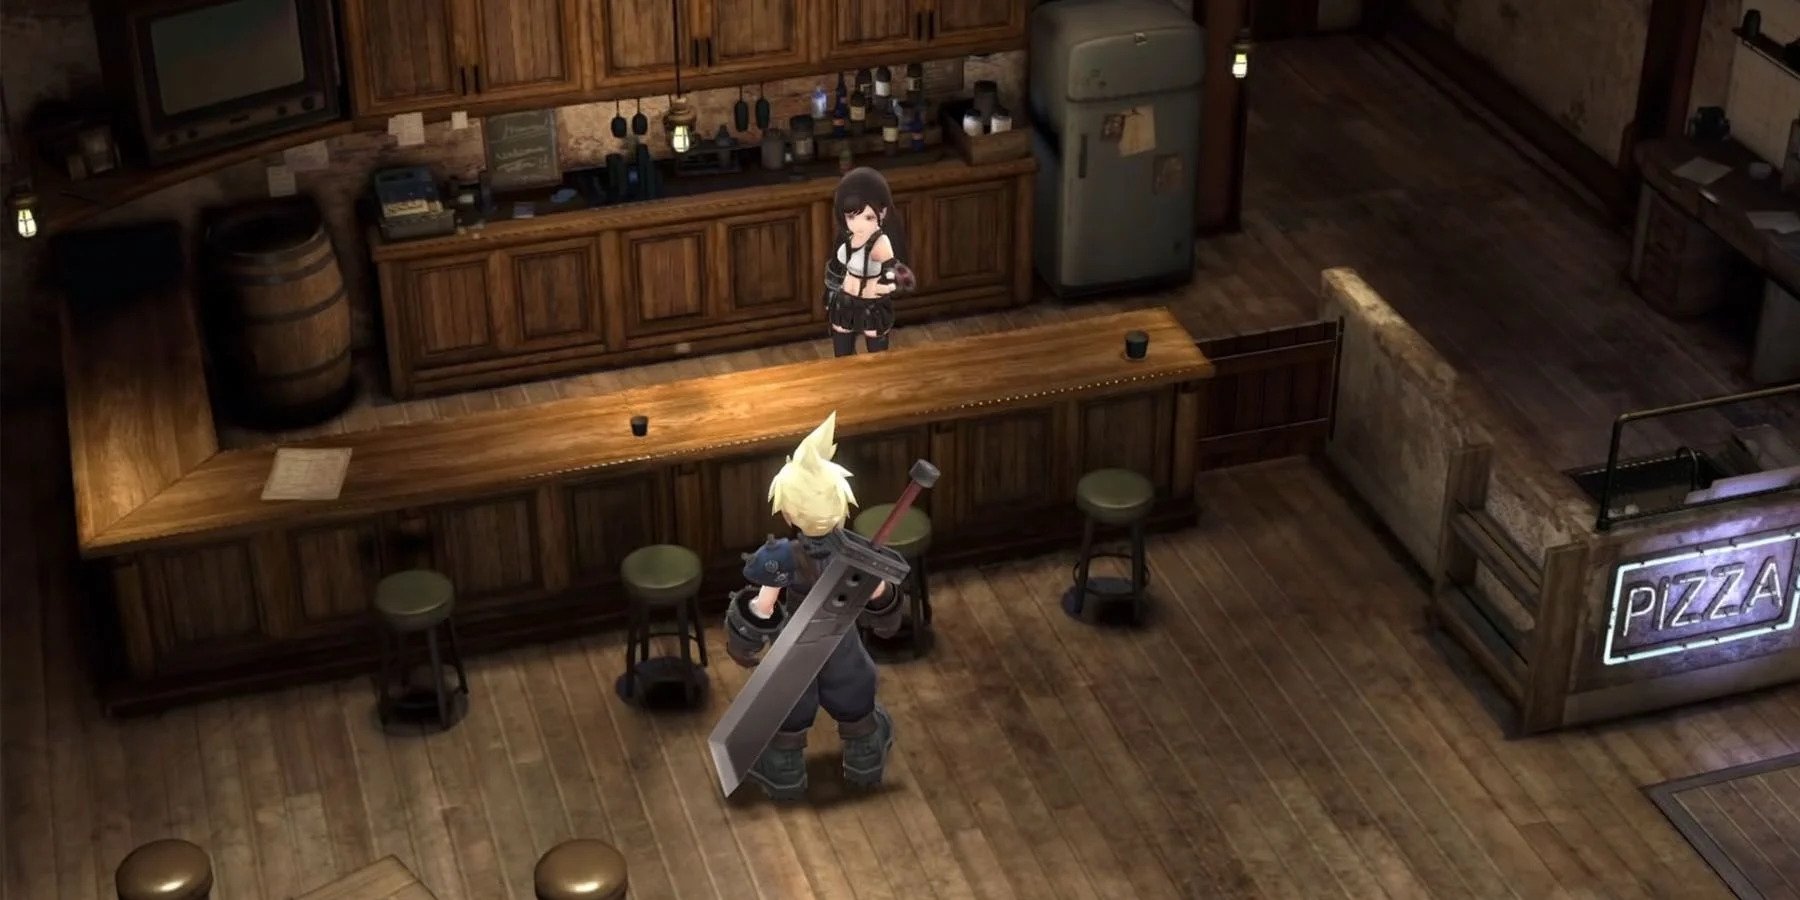 Final Fantasy VII - Ever Crisis to be Released in Late September